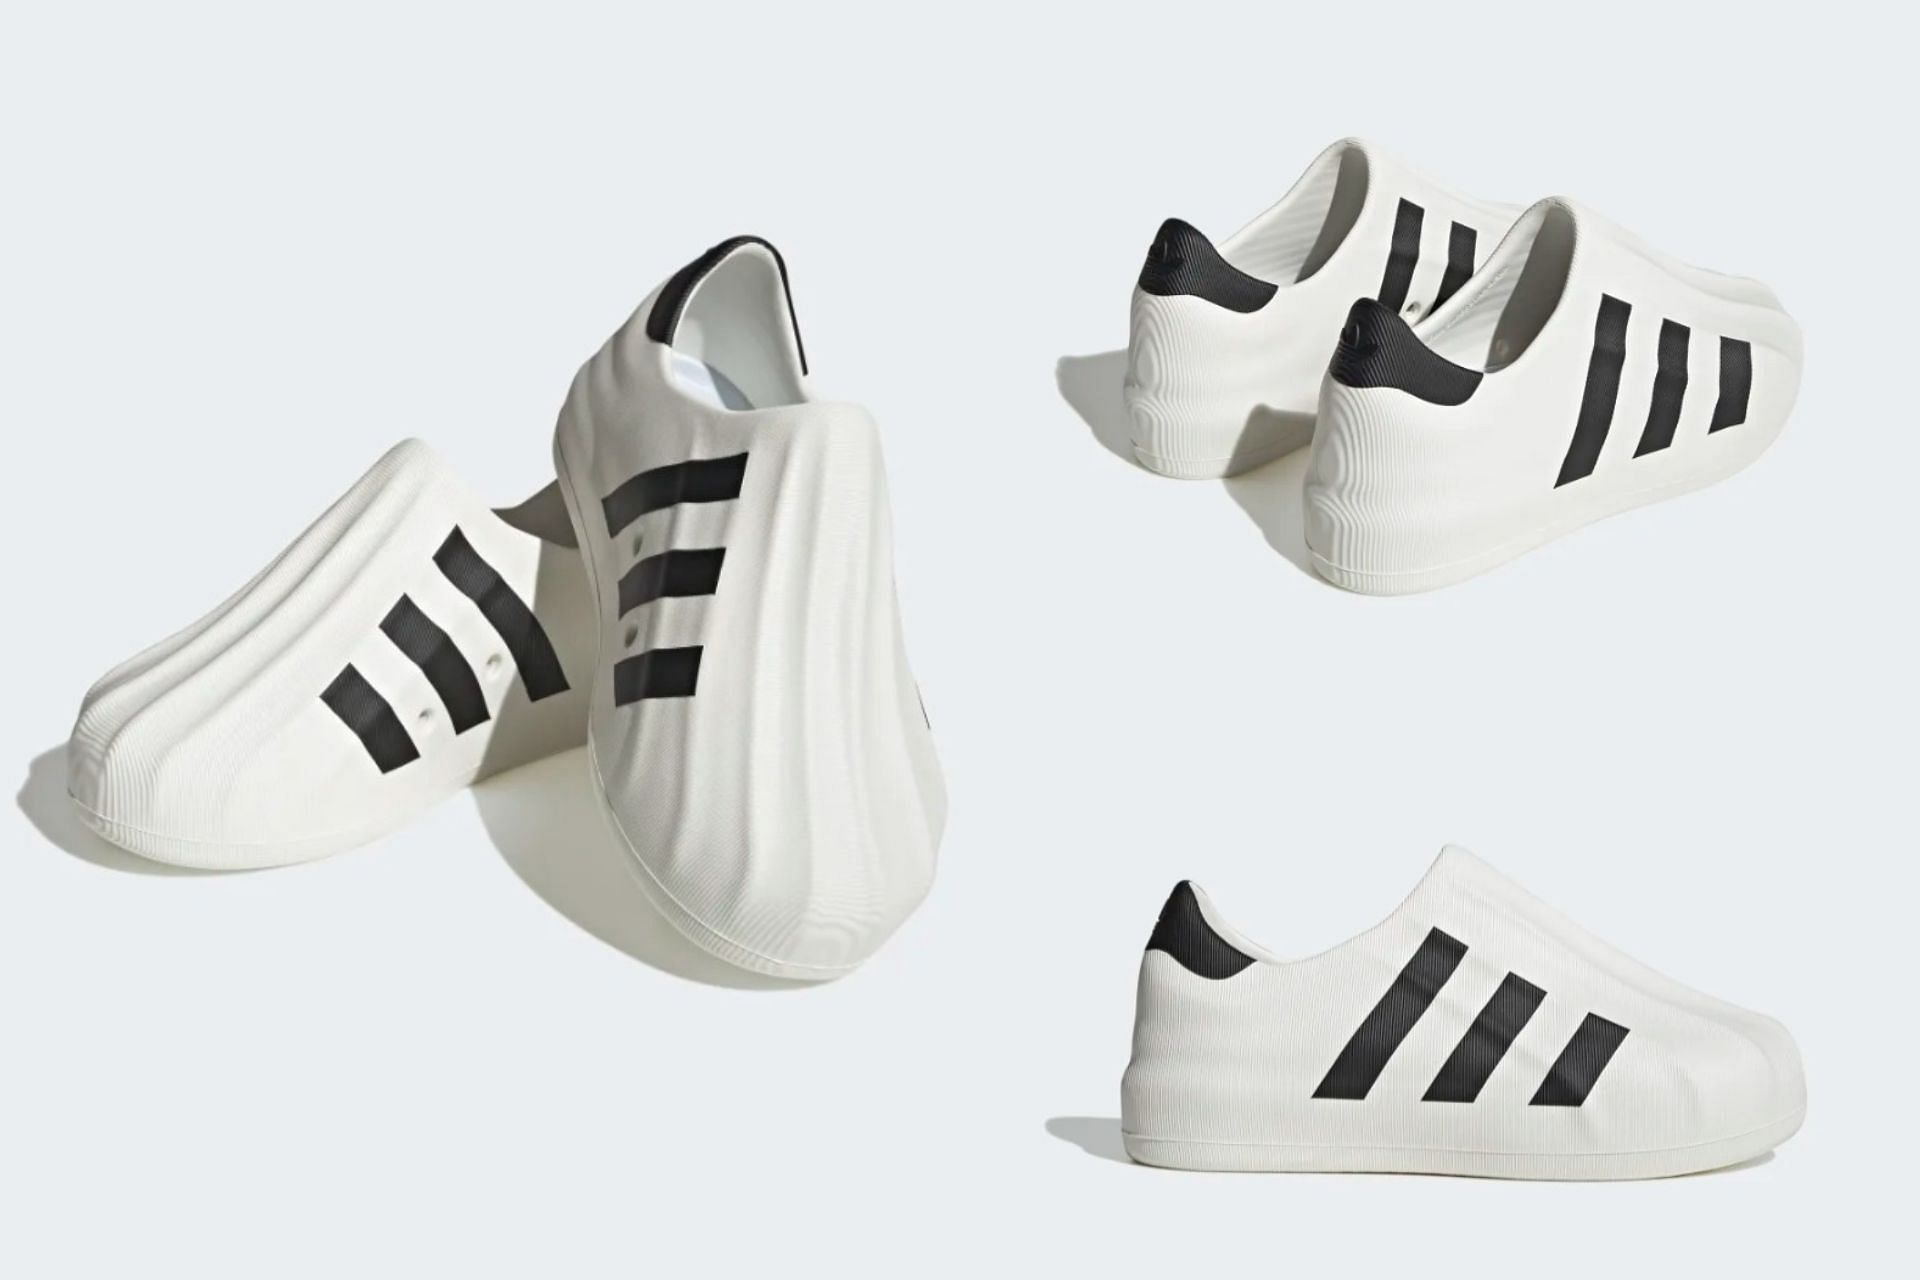 Adidas Adifom Superstar shoes: Where to buy, price, and more details ...